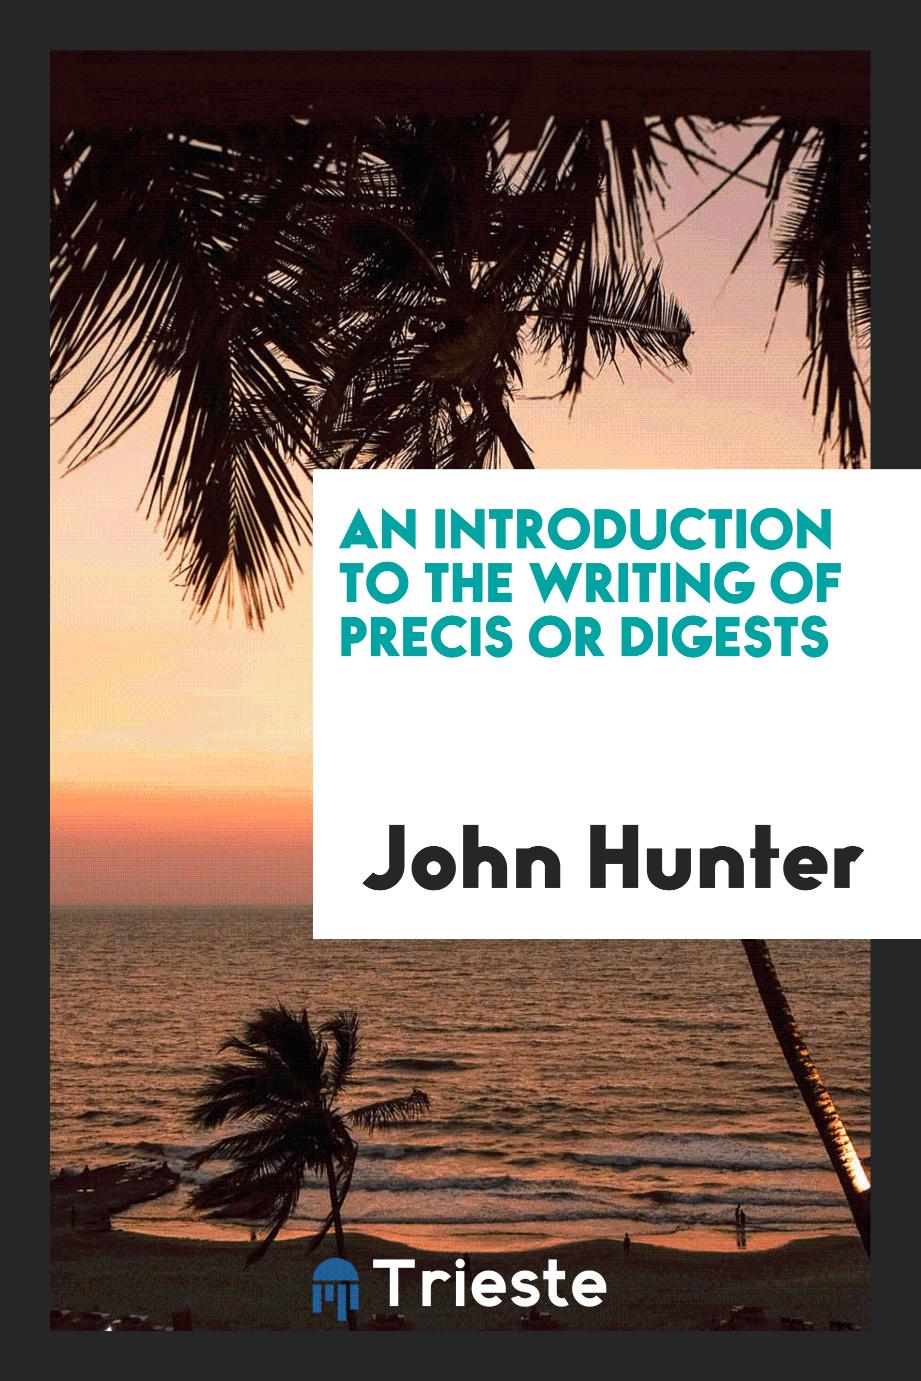 An Introduction to the Writing of Precis or Digests